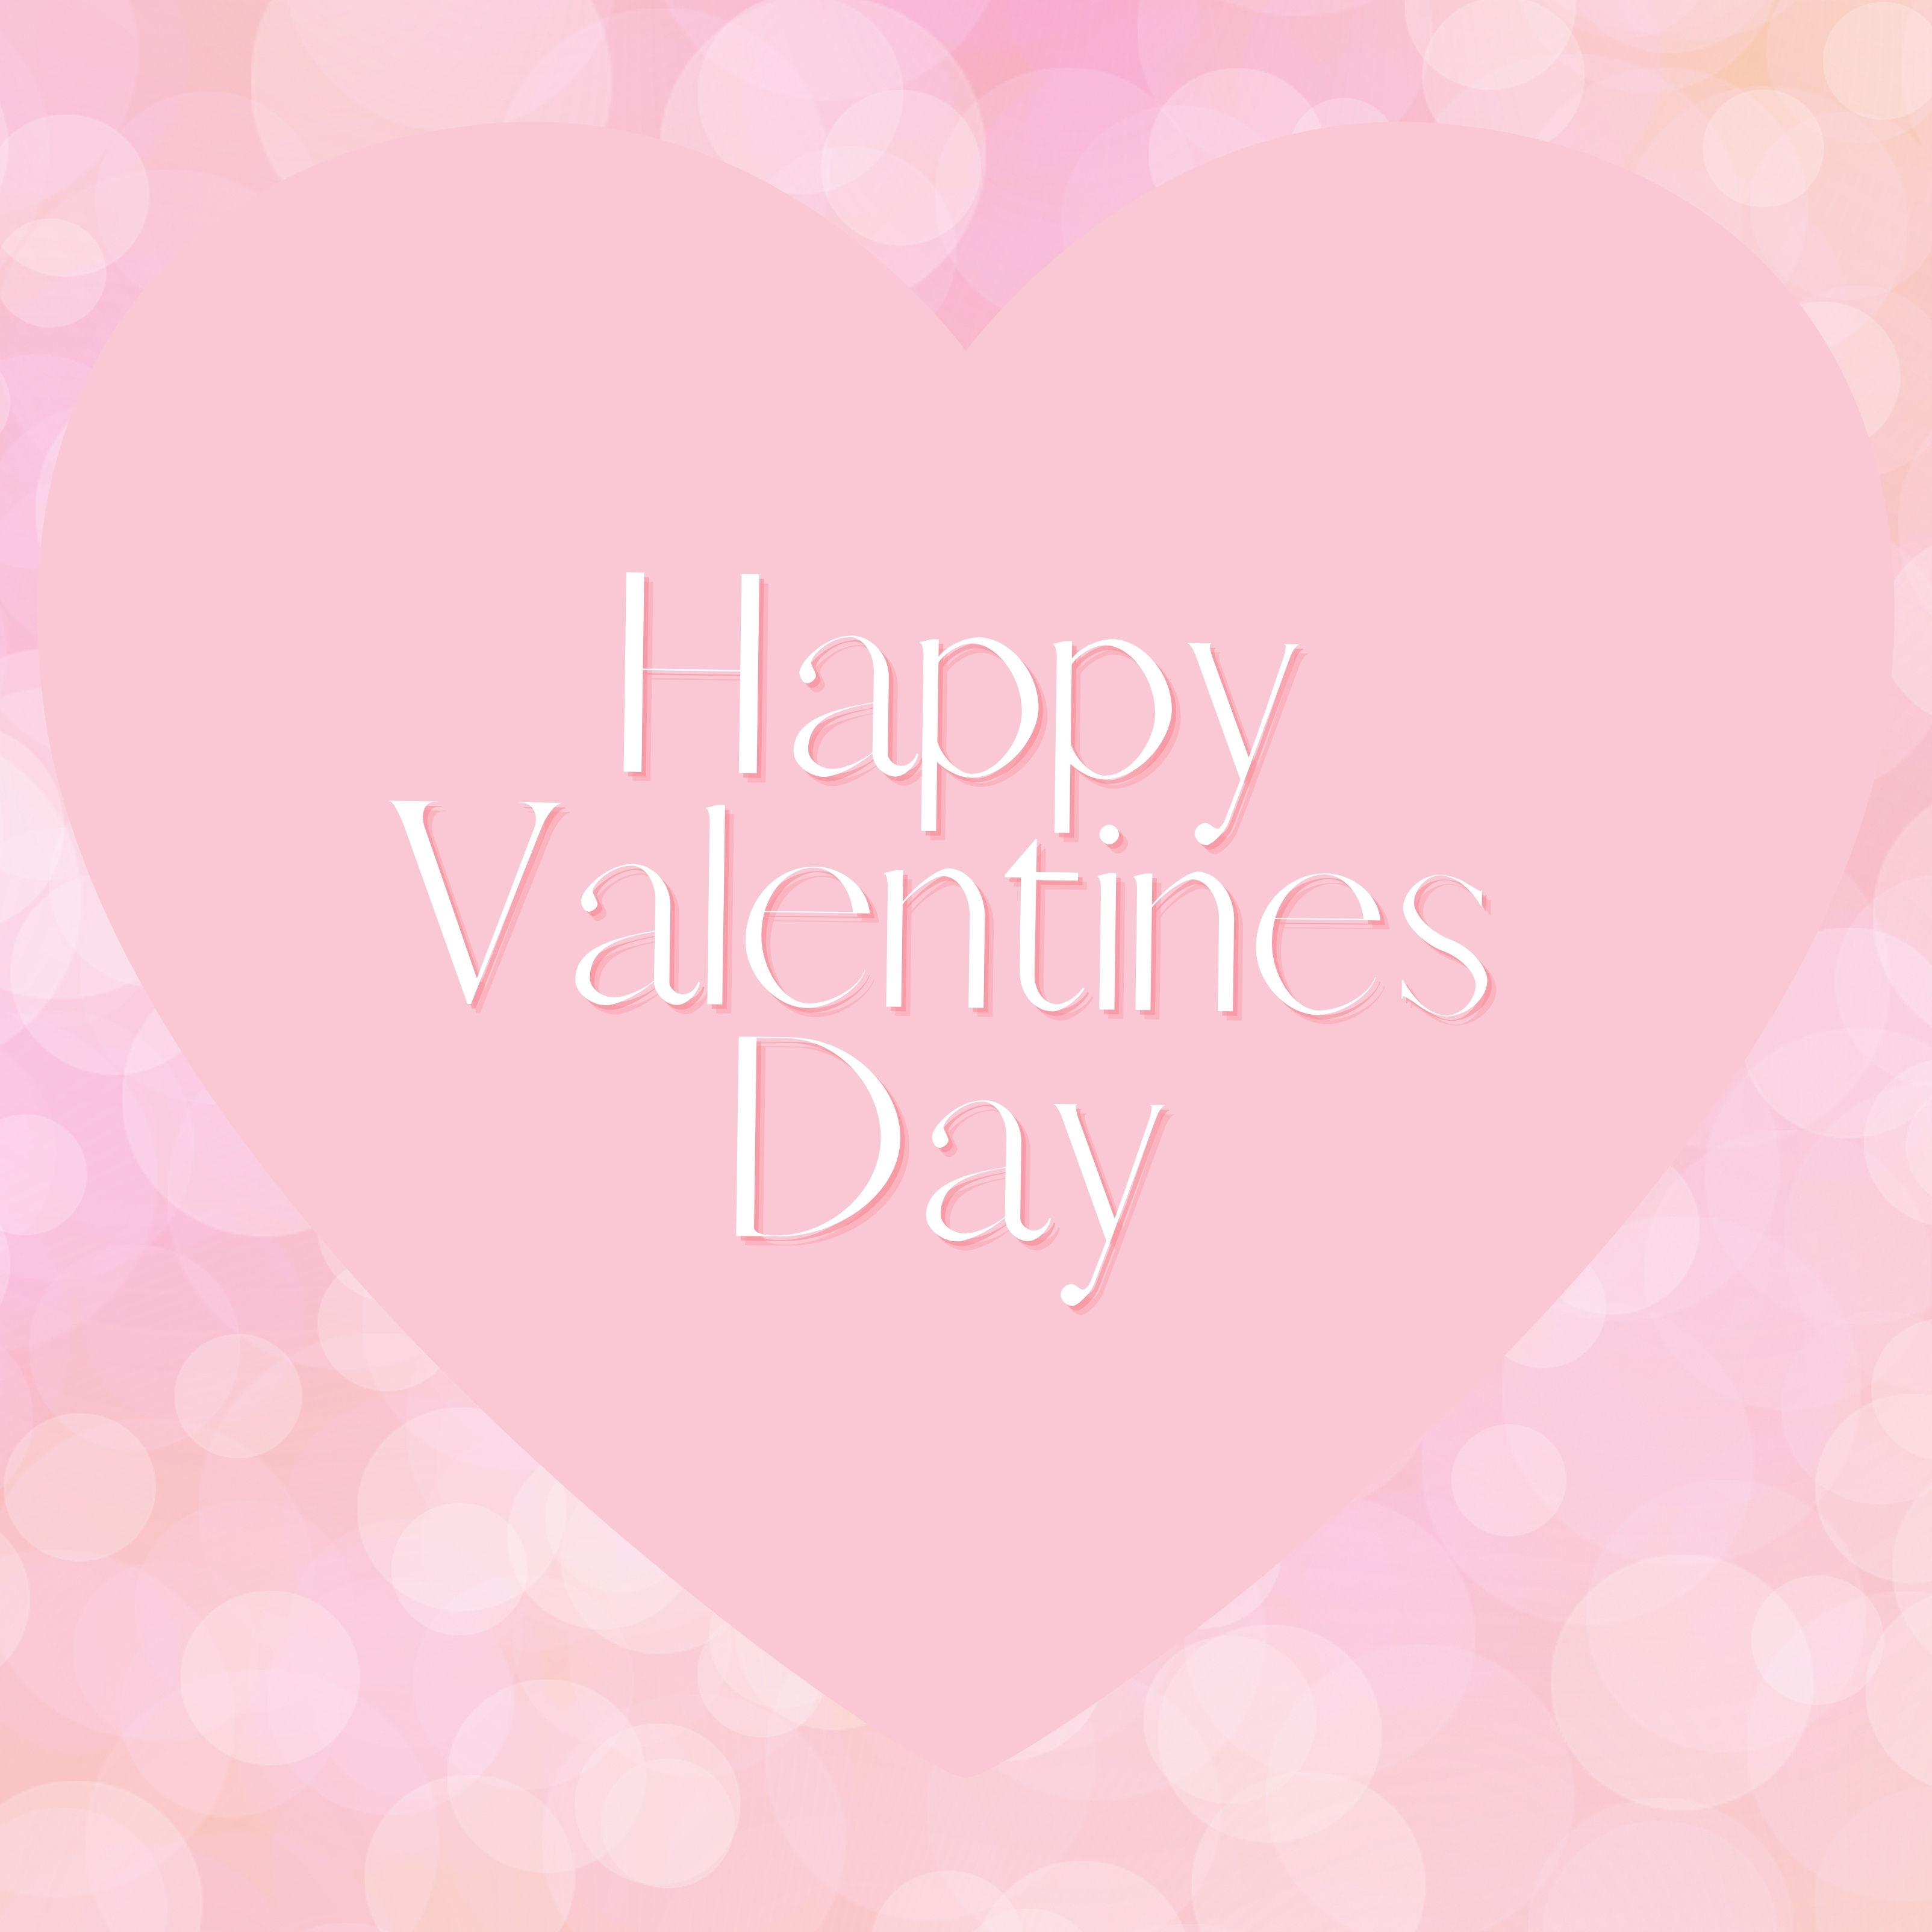 Valentine's Day Wallpapers HD - iPad Wallpapers 4k,5K and iPad backgrounds